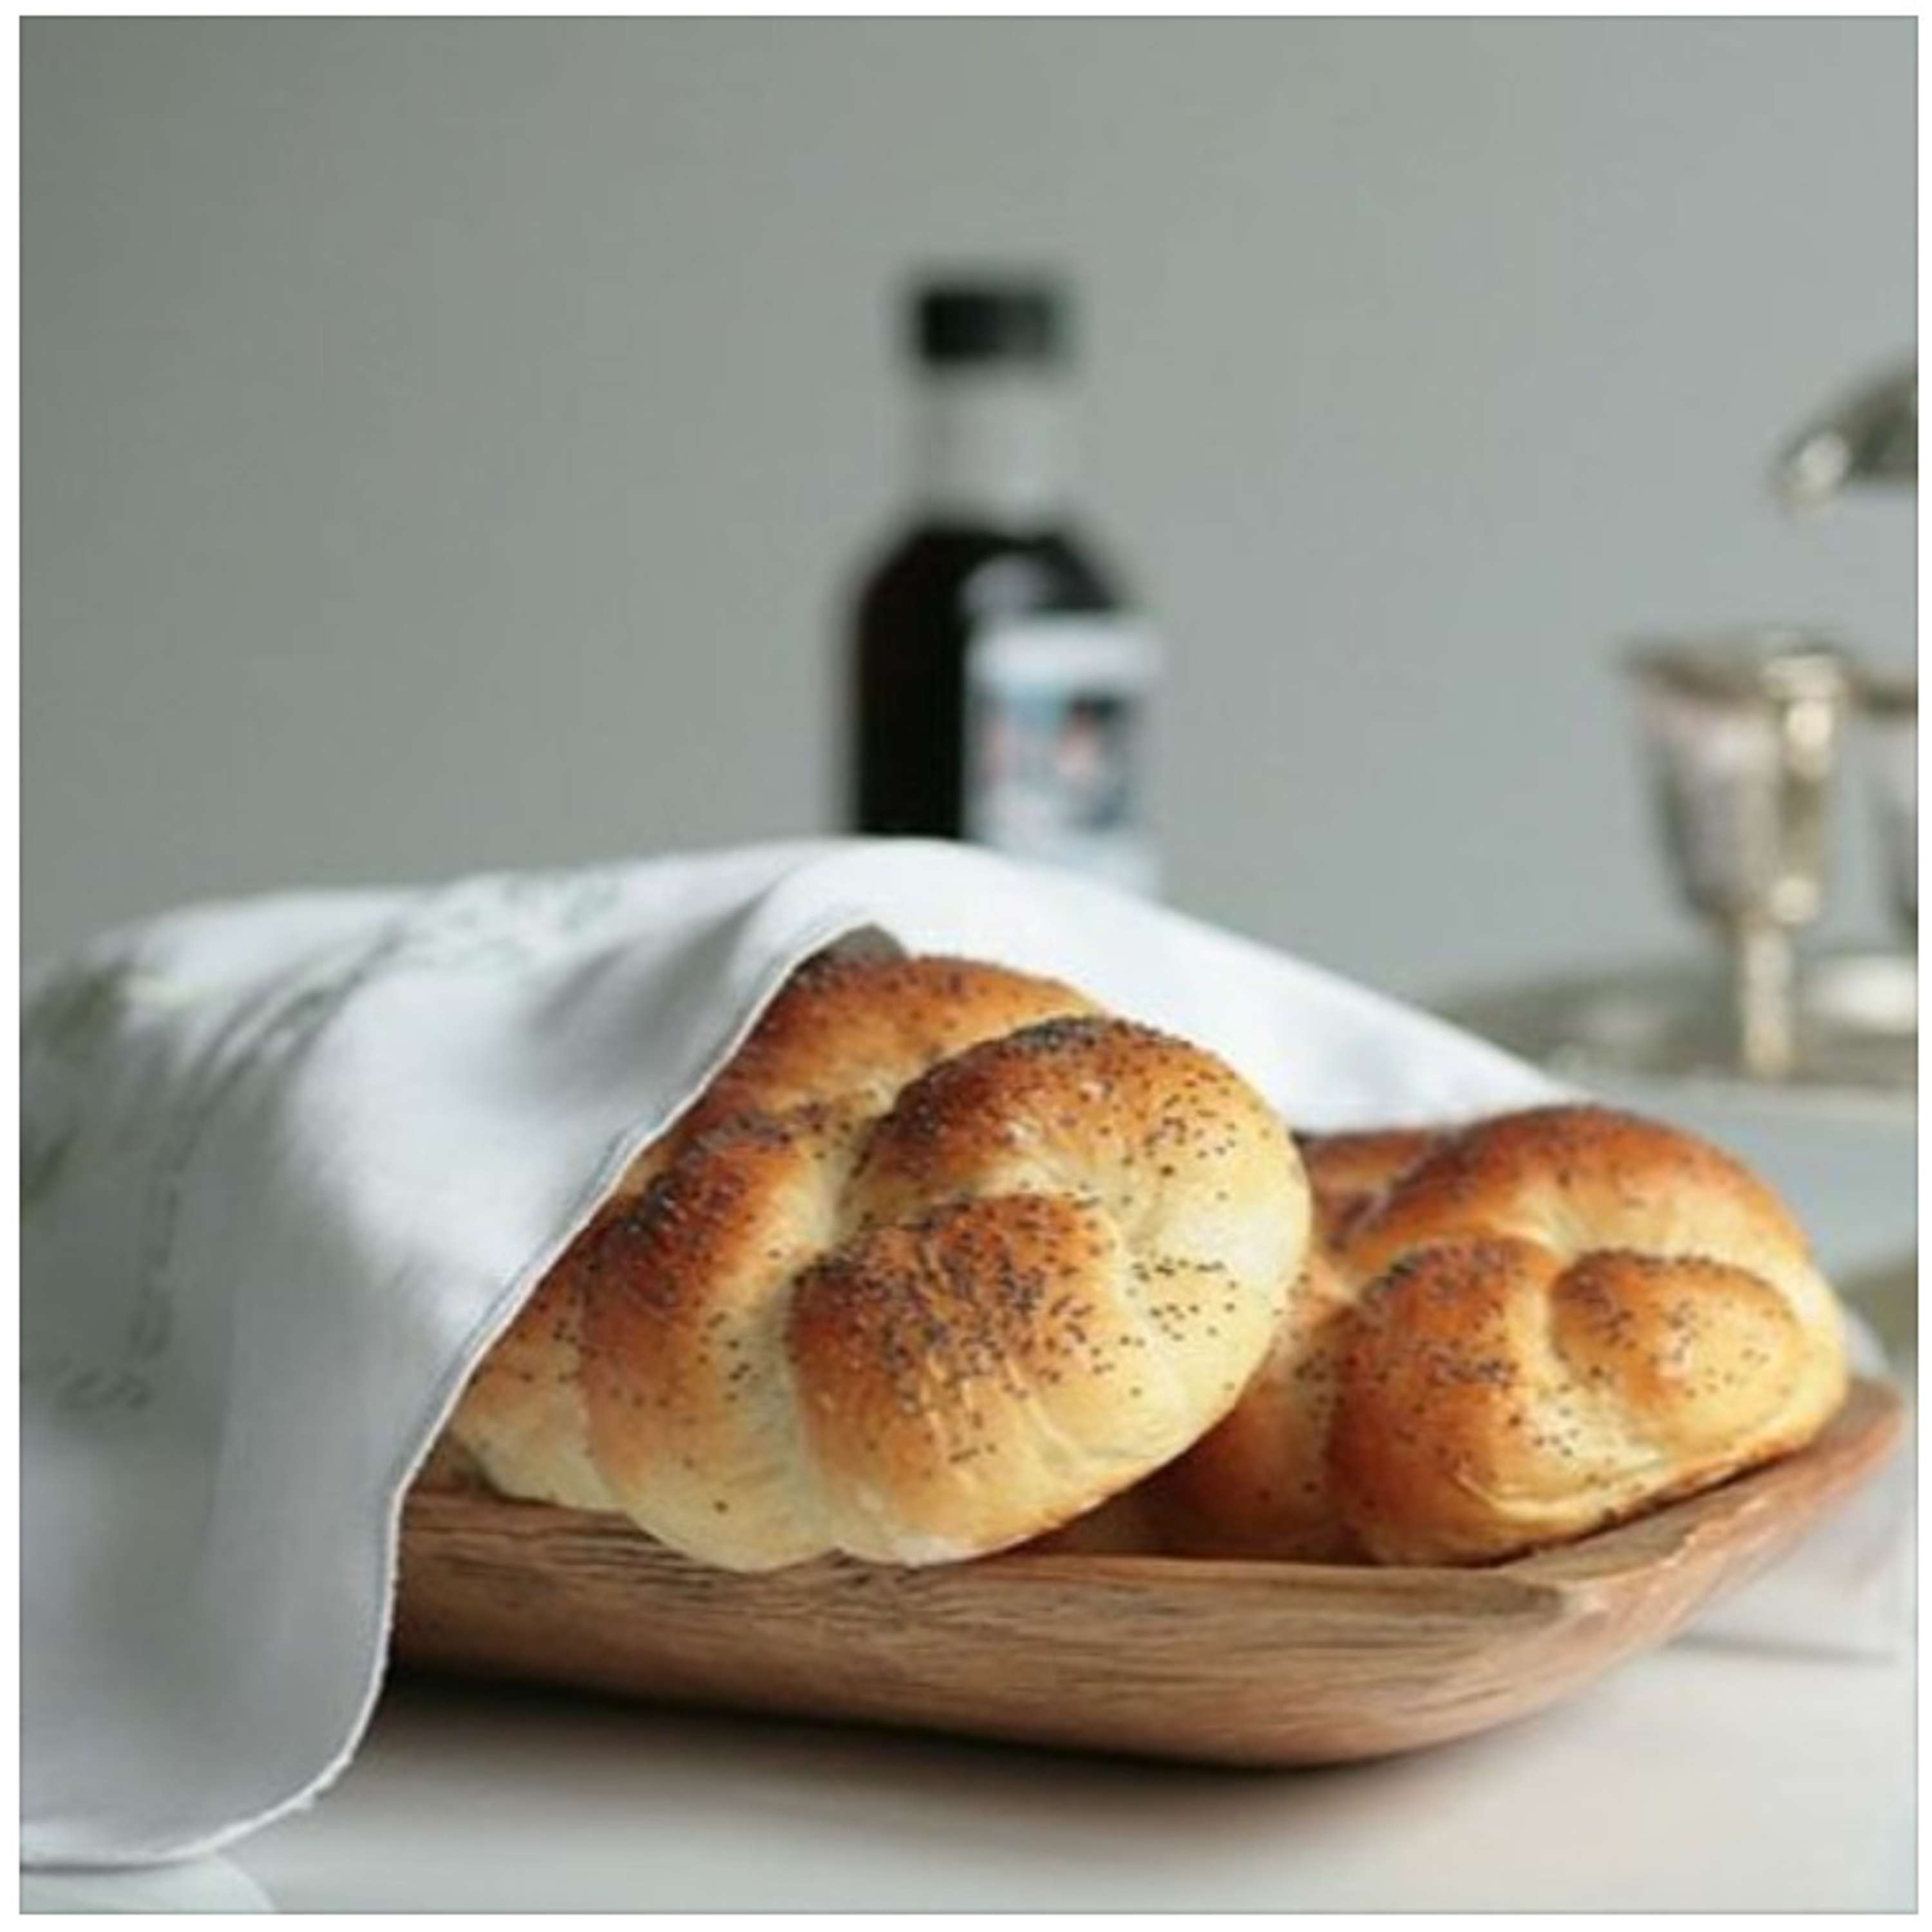 Shabbos - An Extra 5 Seconds with the Challah